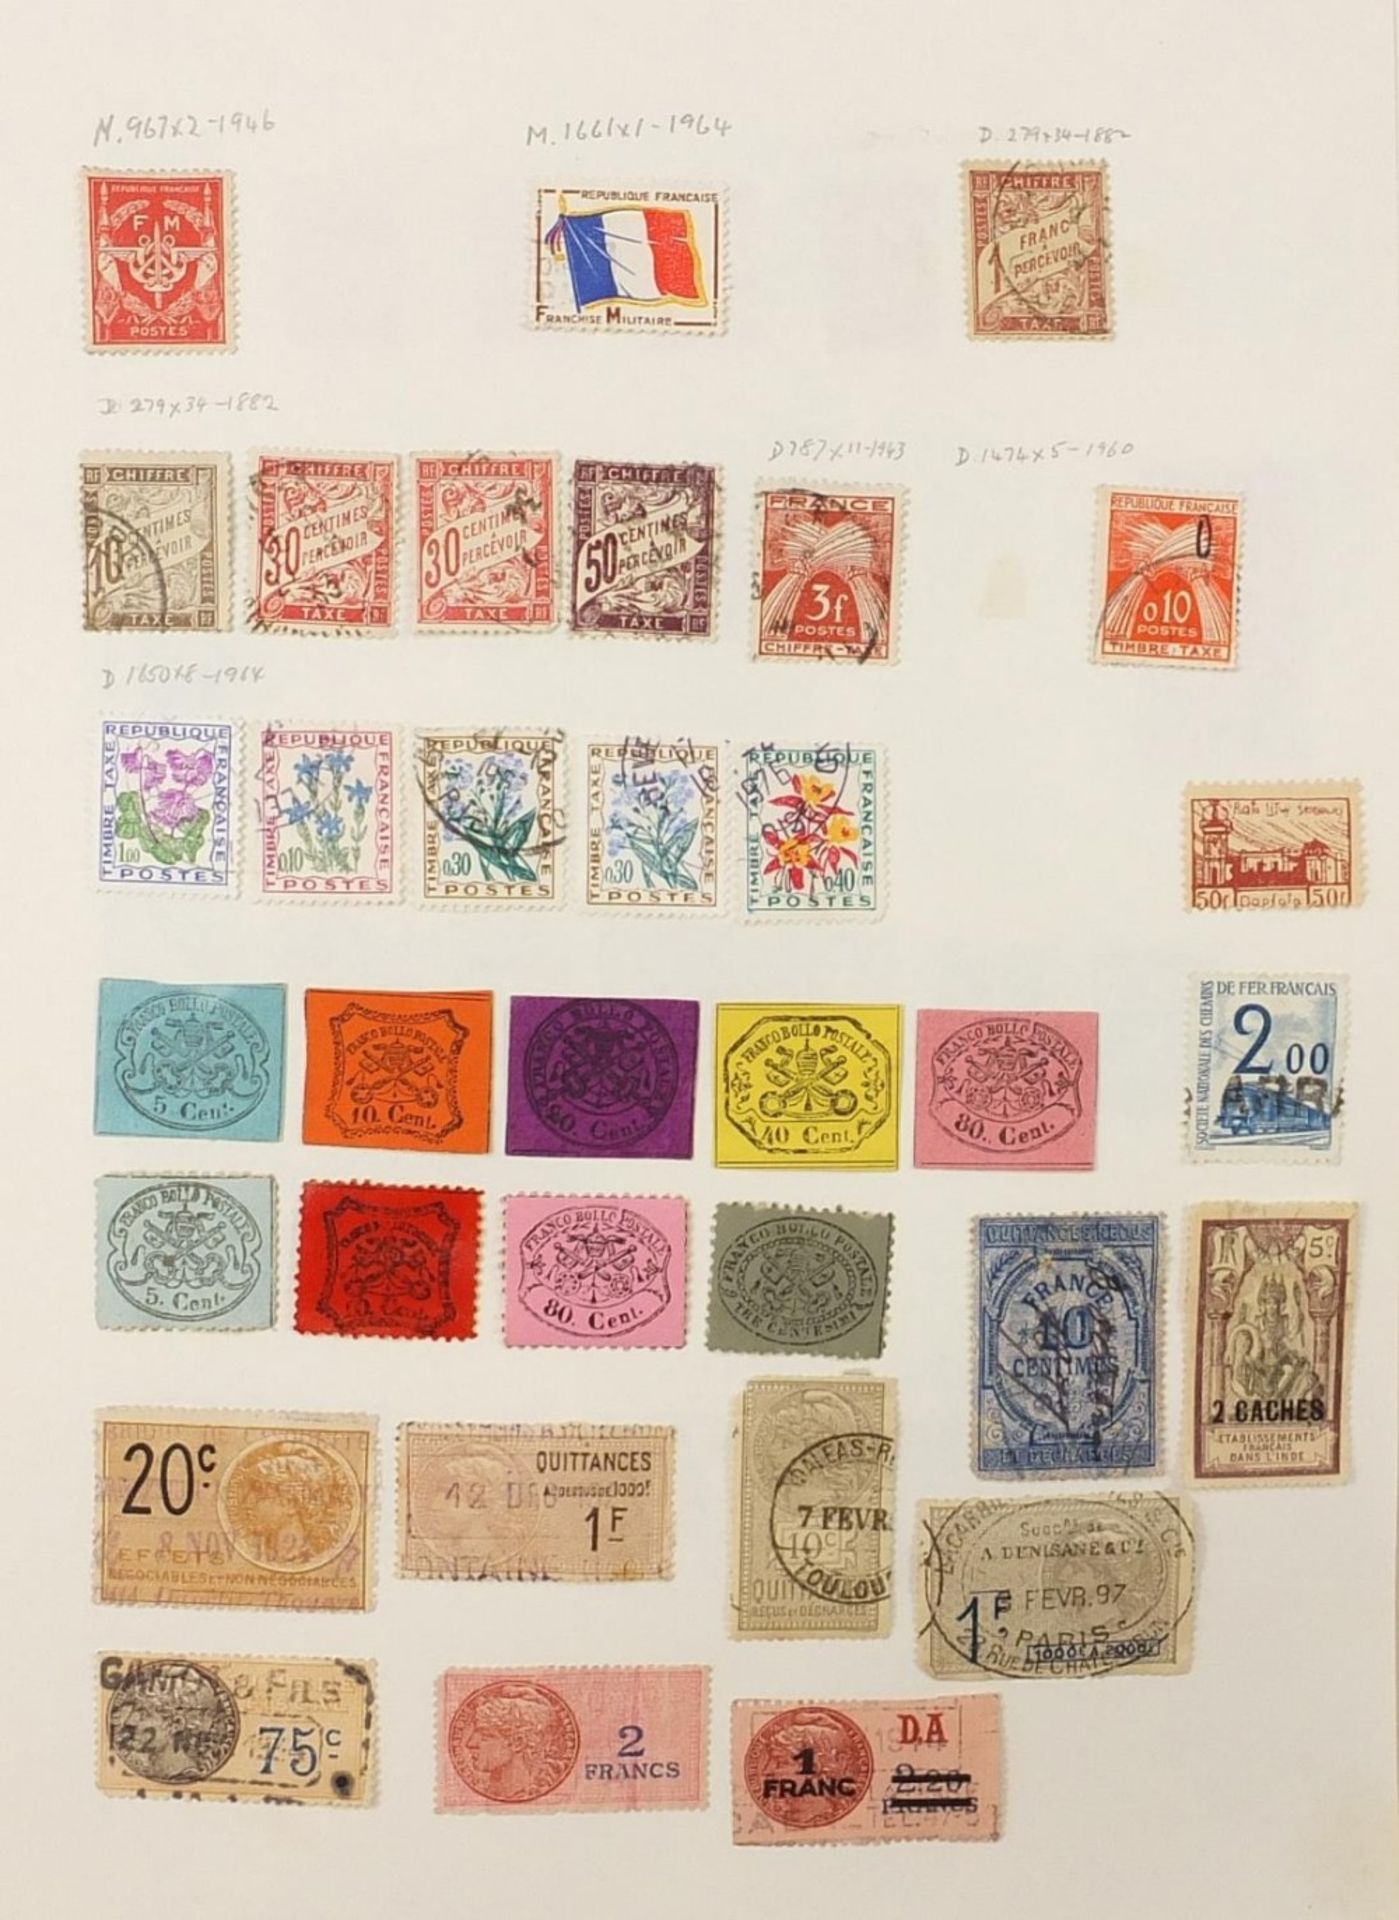 Extensive collection of antique and later world stamps arranged in albums including Brazil, - Image 10 of 52